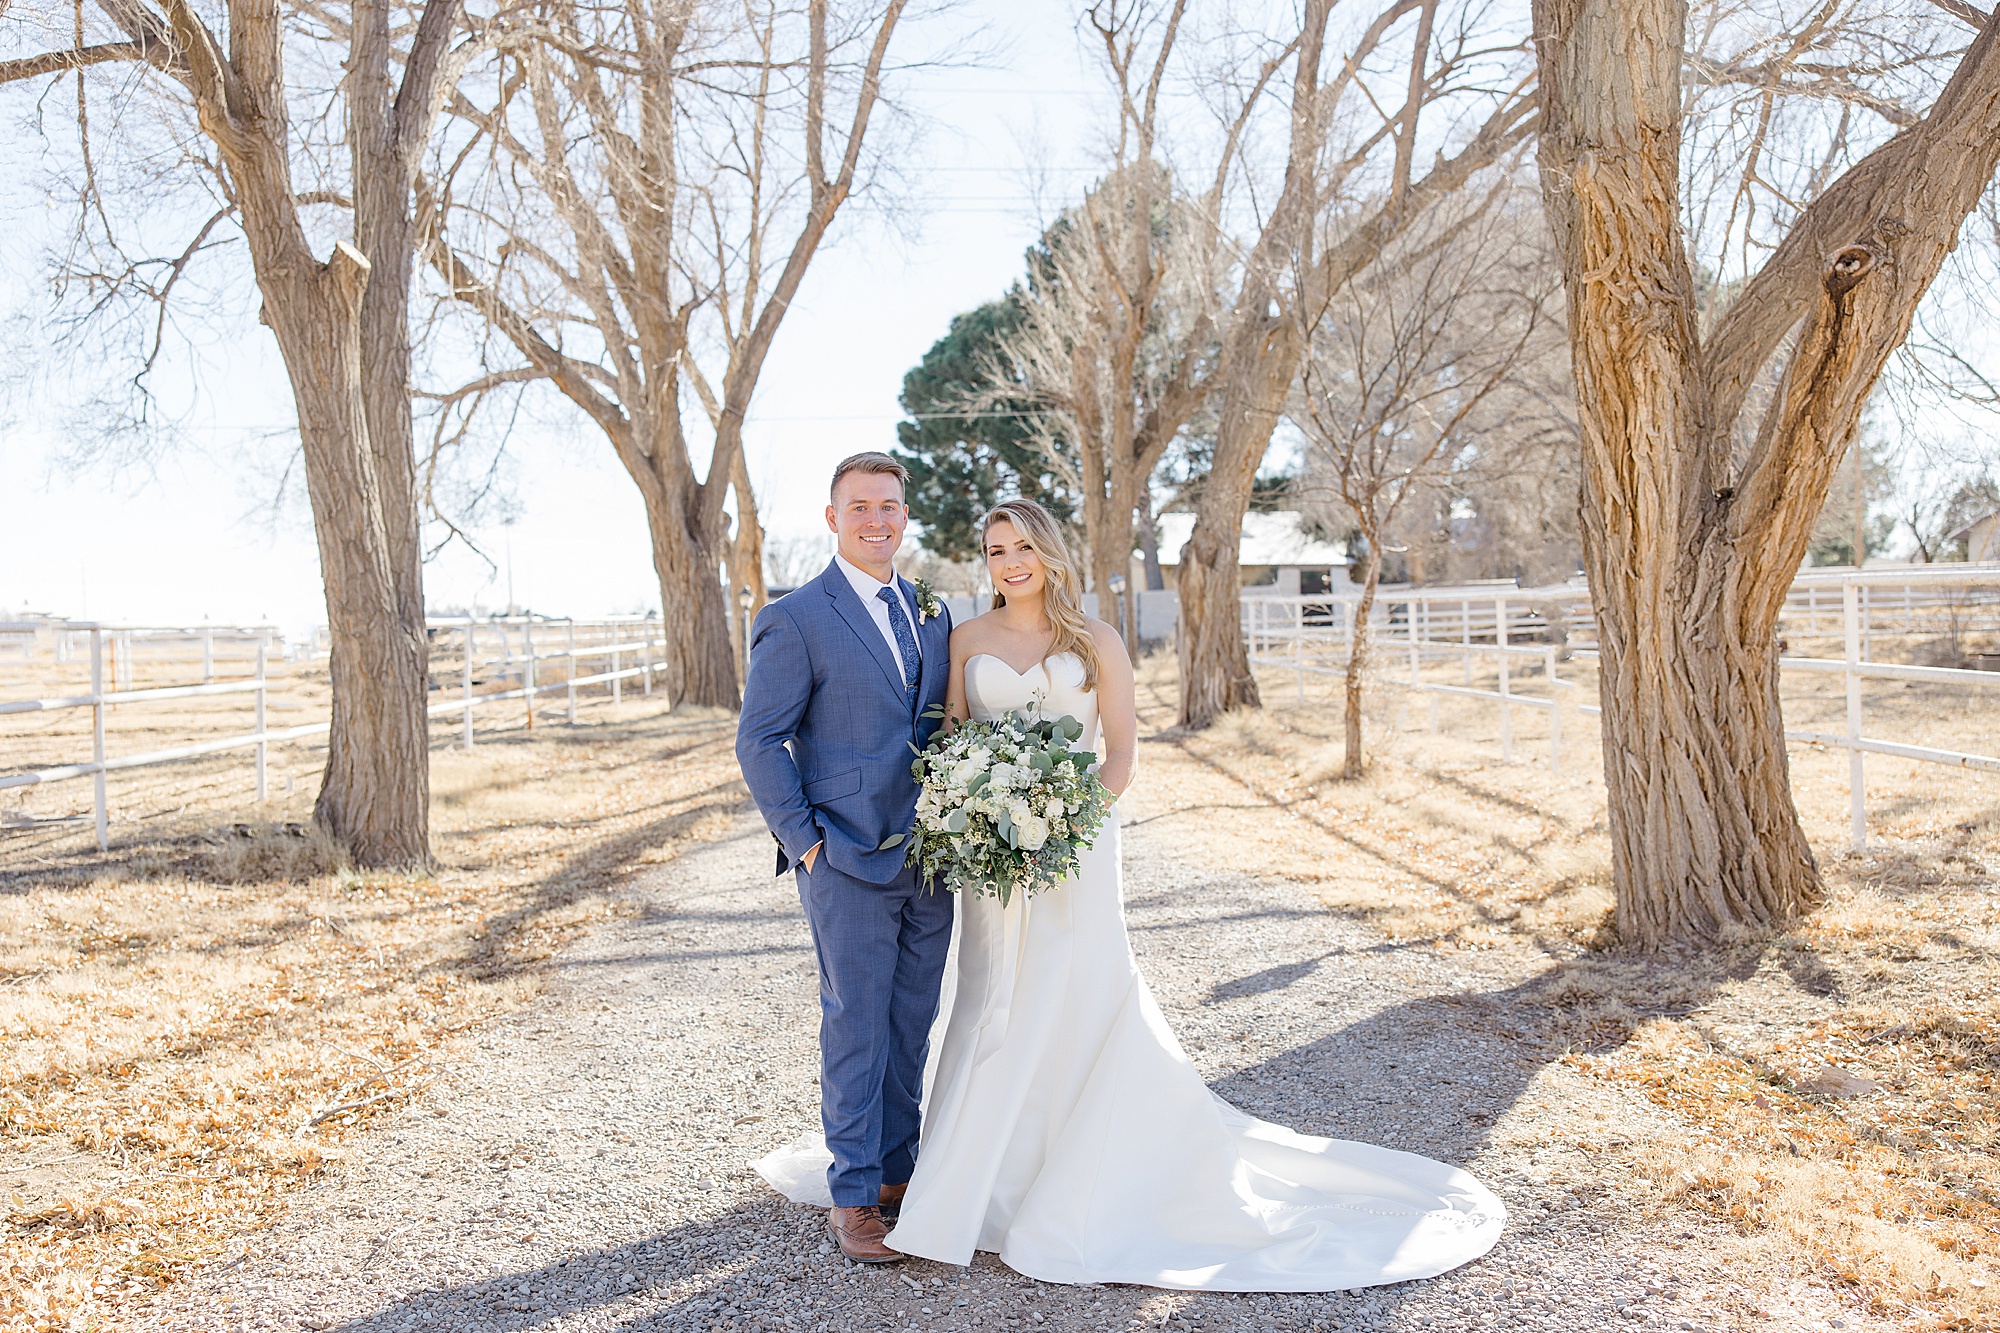 newlyweds pose on driveway during winter wedding in Rosewell, New Mexico